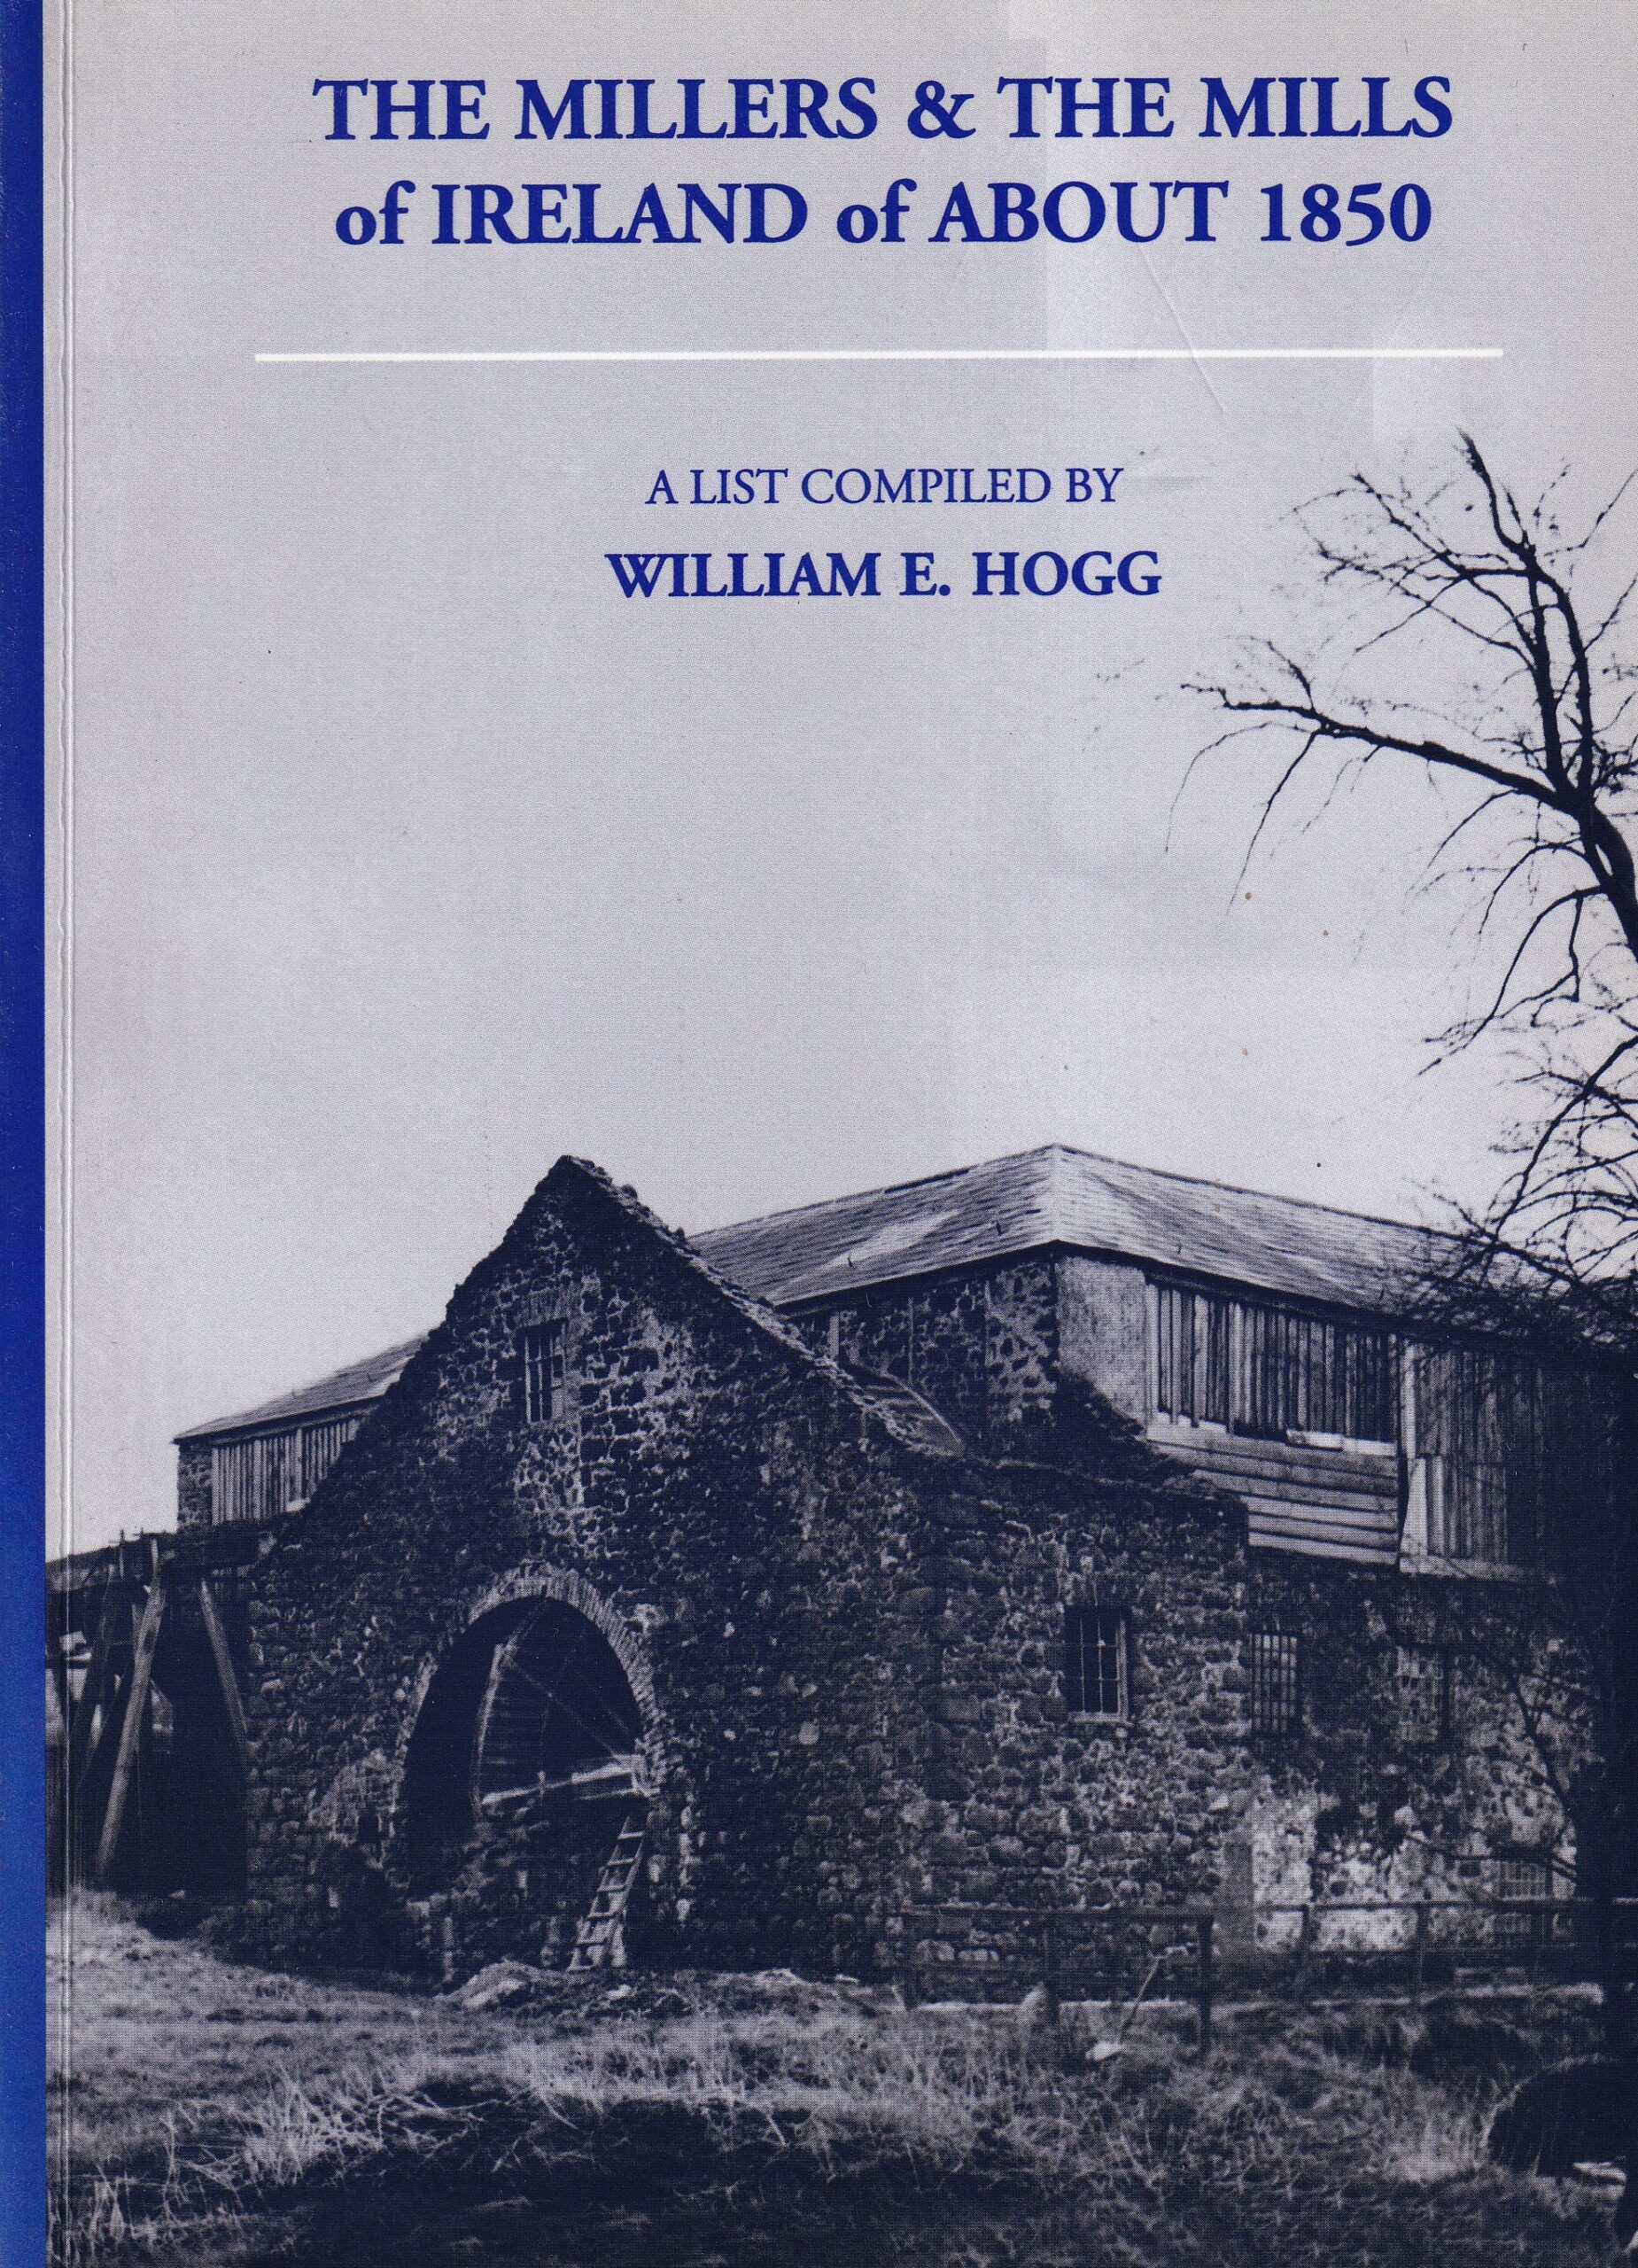 The Millers and the Mills of Ireland of about 1850: A List Compiled by William E. Hogg | William E. Hogg | Charlie Byrne's